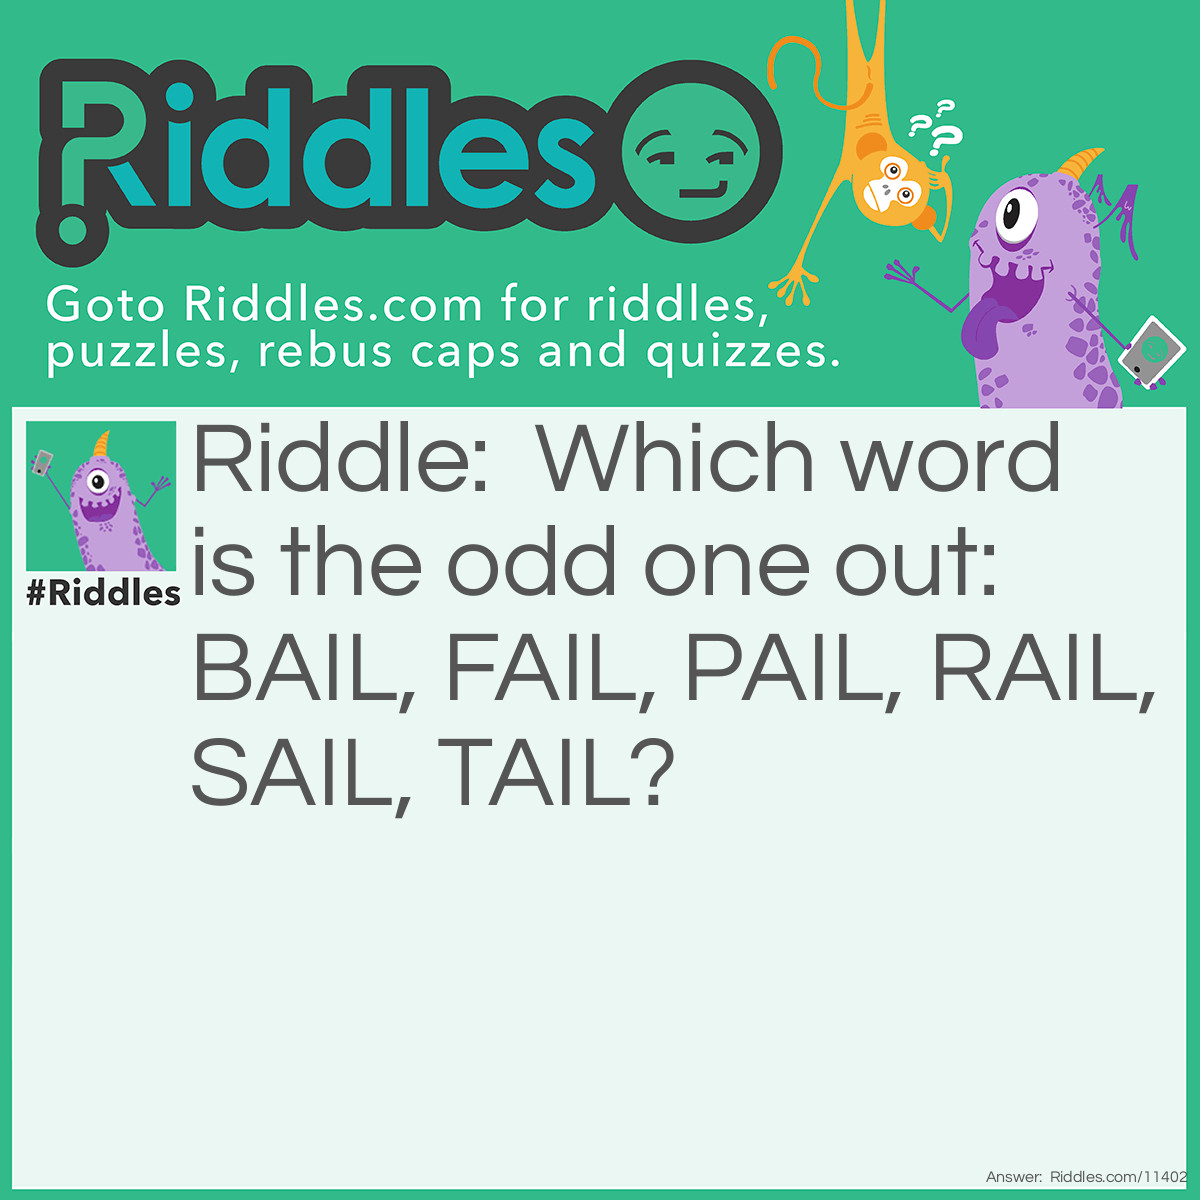 Riddle: Which word is the odd one out: BAIL, FAIL, PAIL, RAIL, SAIL, TAIL? Answer: FAIL is the odd one out because it does not have a homophone. BAIL has BALE (like a bale of hay), PAIL has PALE, SAIL has SALE, TAIL has TALE, and RAIL has RALE. FAIL has FALE, which is not a real word, and therefore cannot be a homophone.